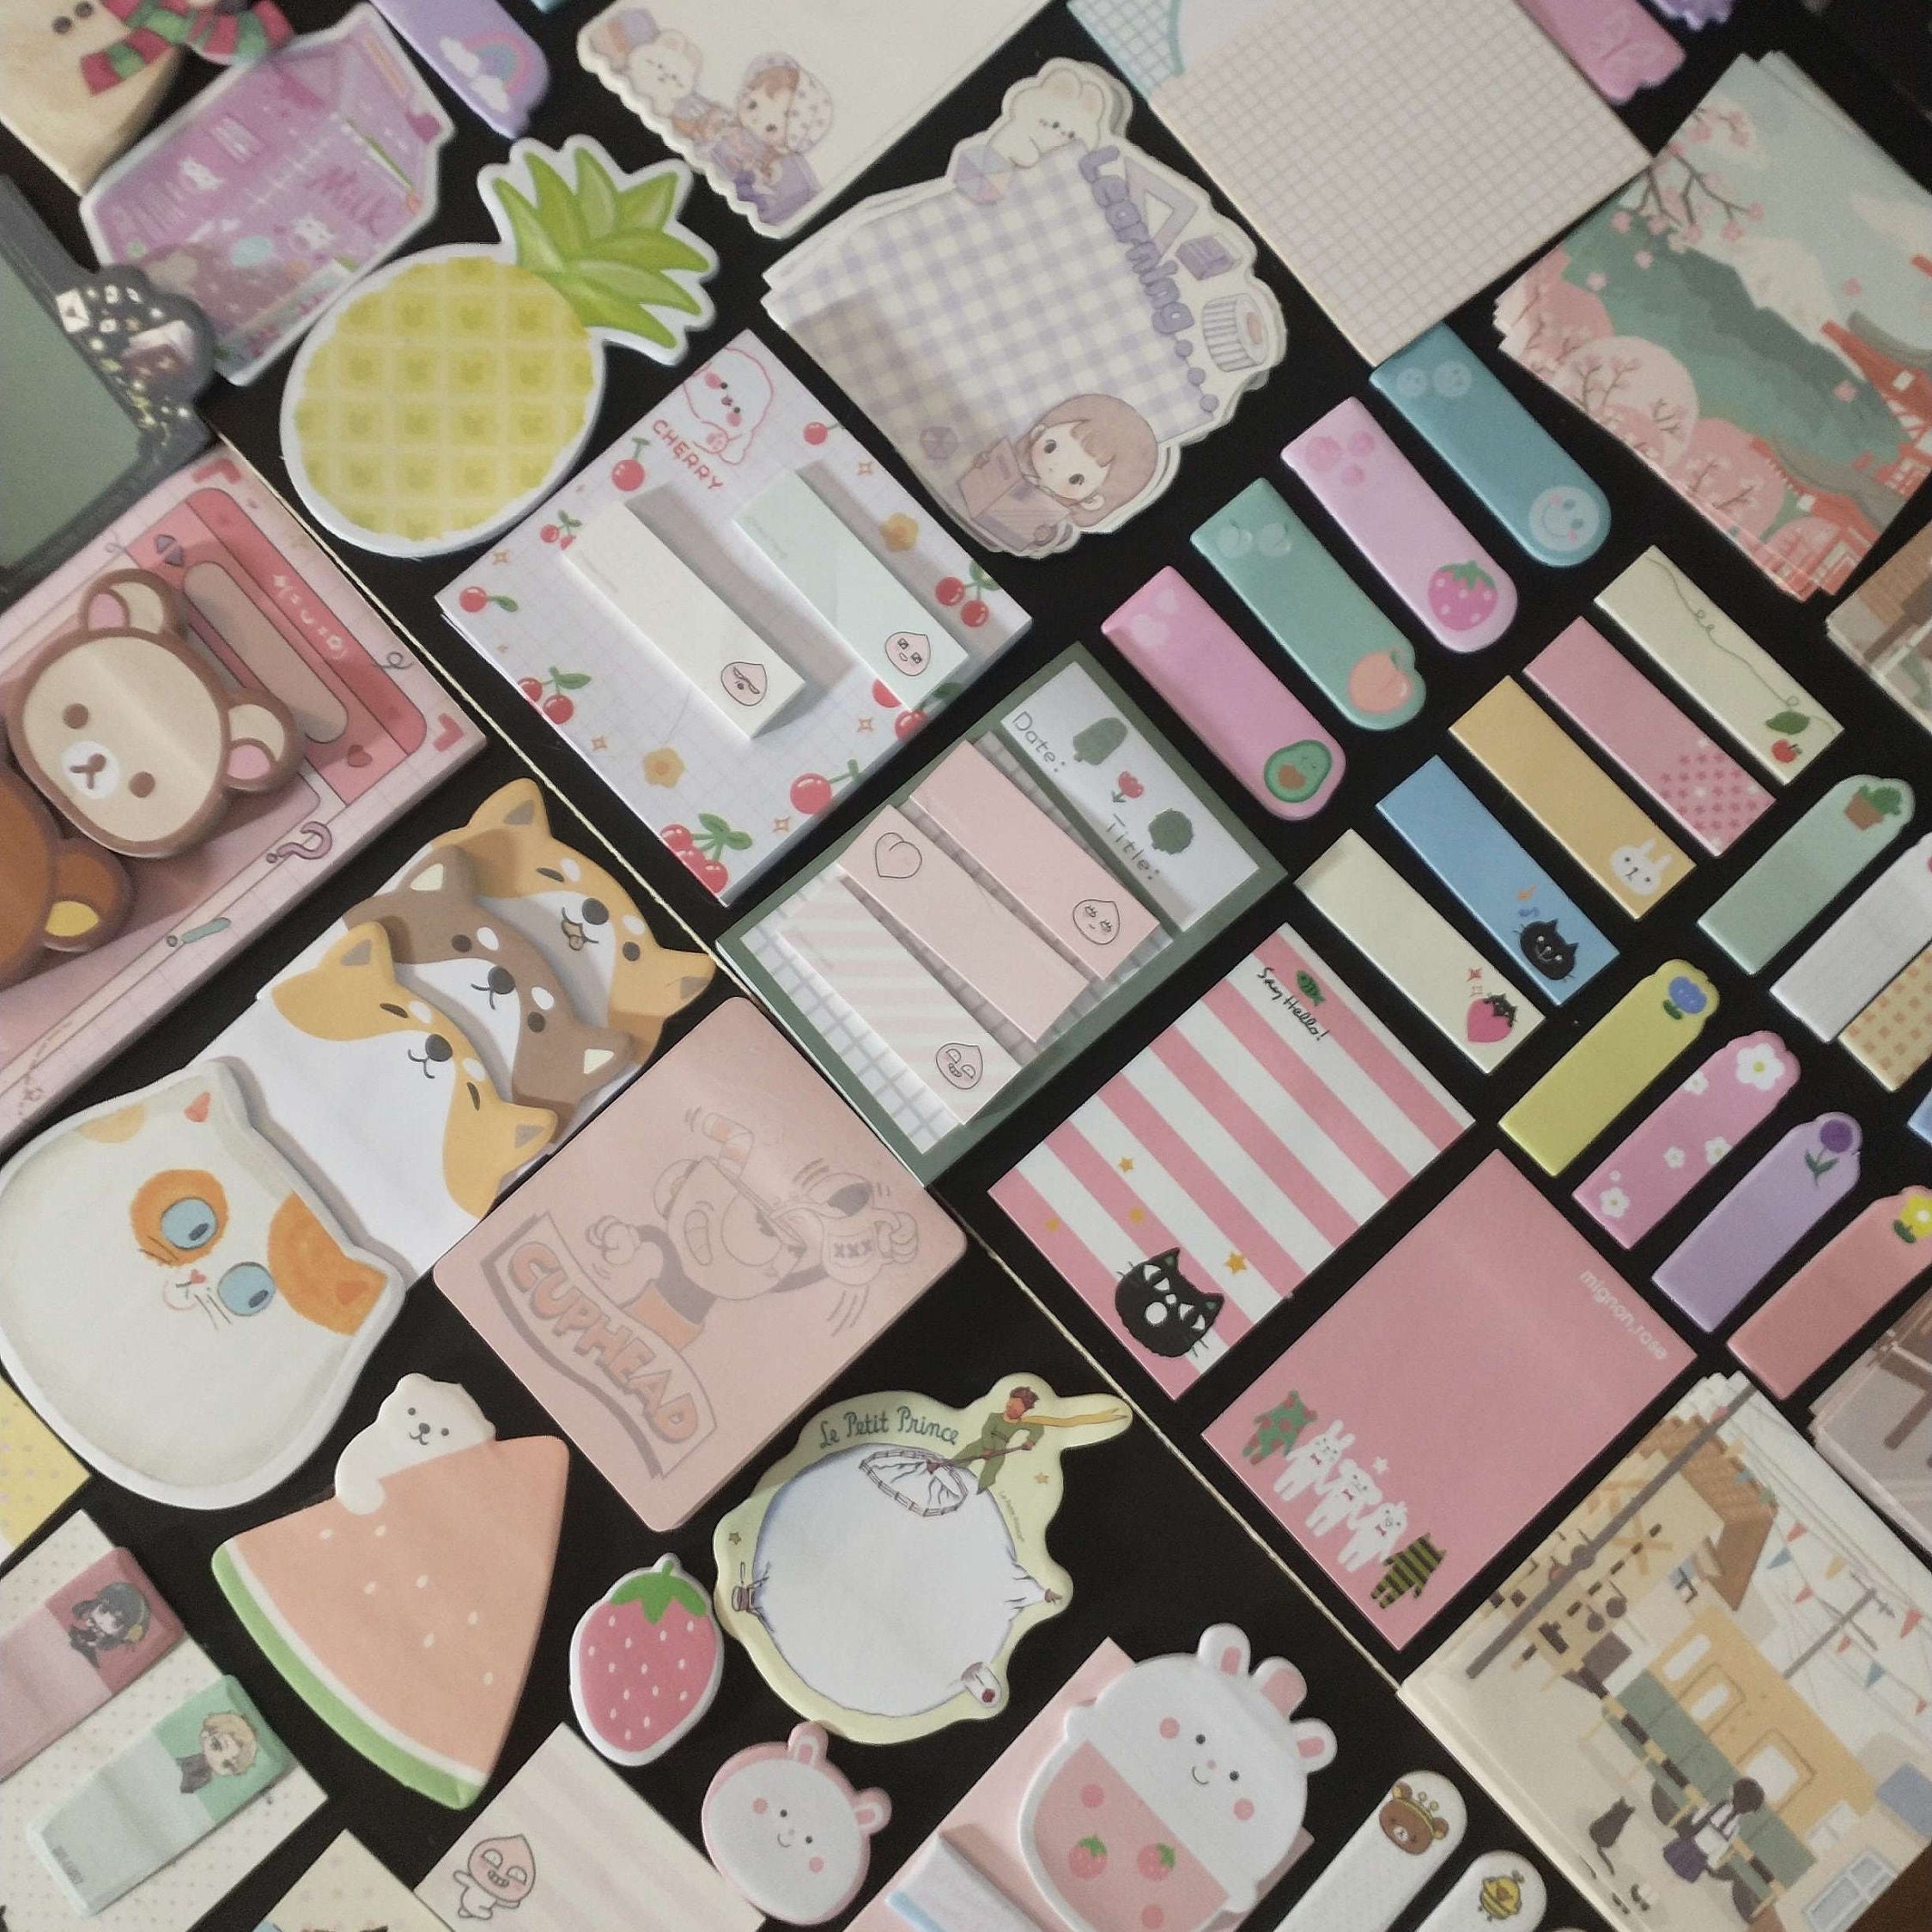 SALE Kawaii Stationery Set, Happy Mail, Japanese Stationery, Floral,  Journal Supplies,, Pen Pal, Letter Writing, Cute Stationery. 